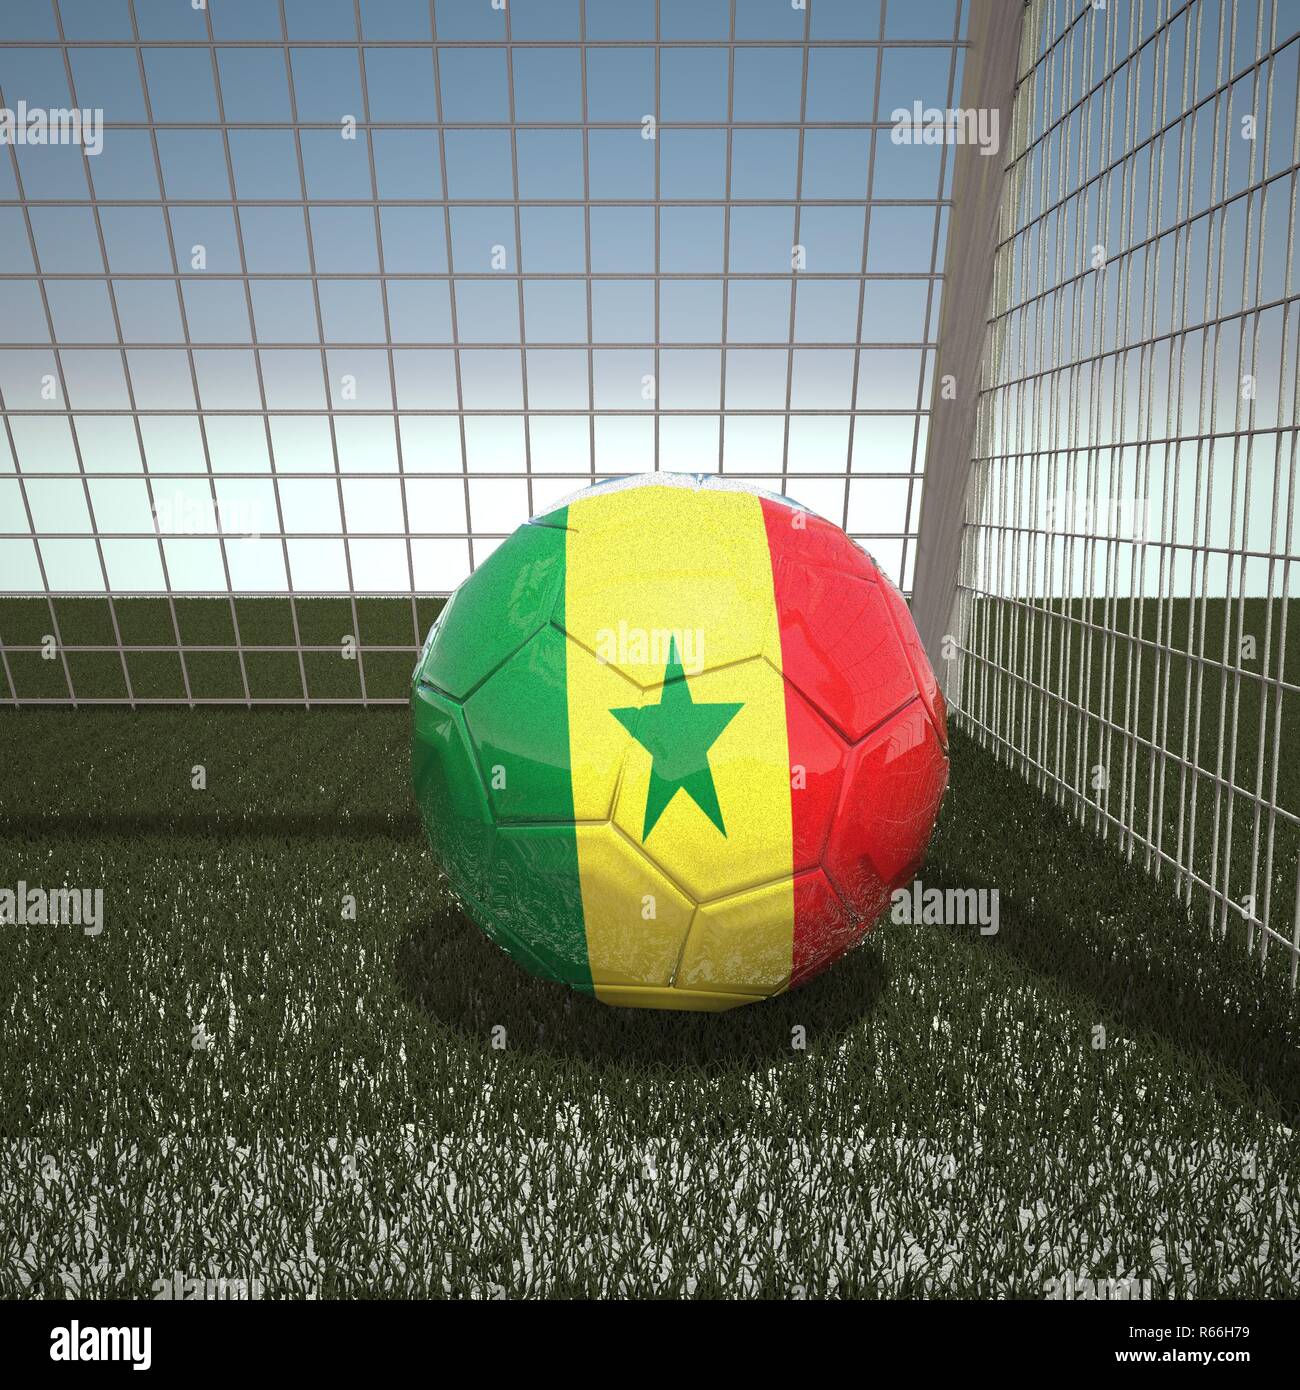 Football with flag of Senegal Stock Photo